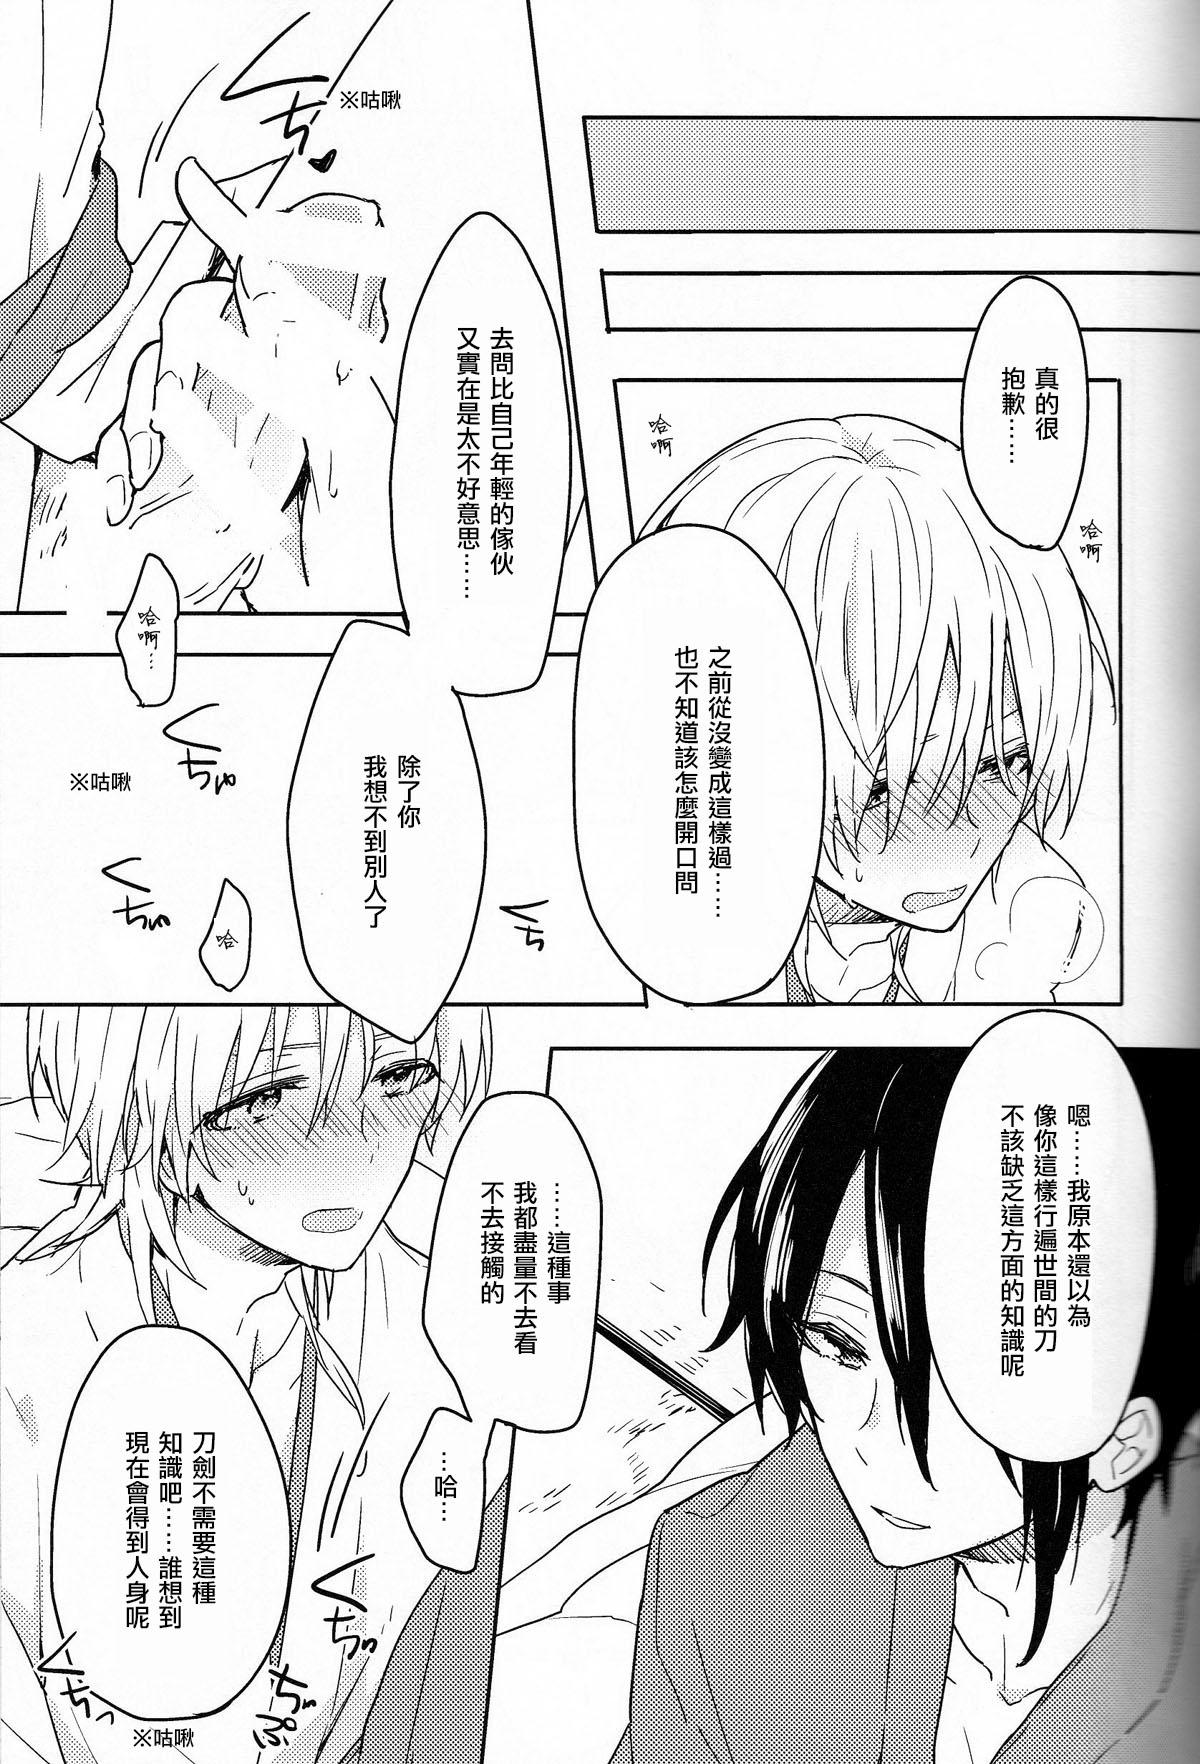 Stretching TRICK DIVE - Touken ranbu Best Blowjobs Ever - Page 5